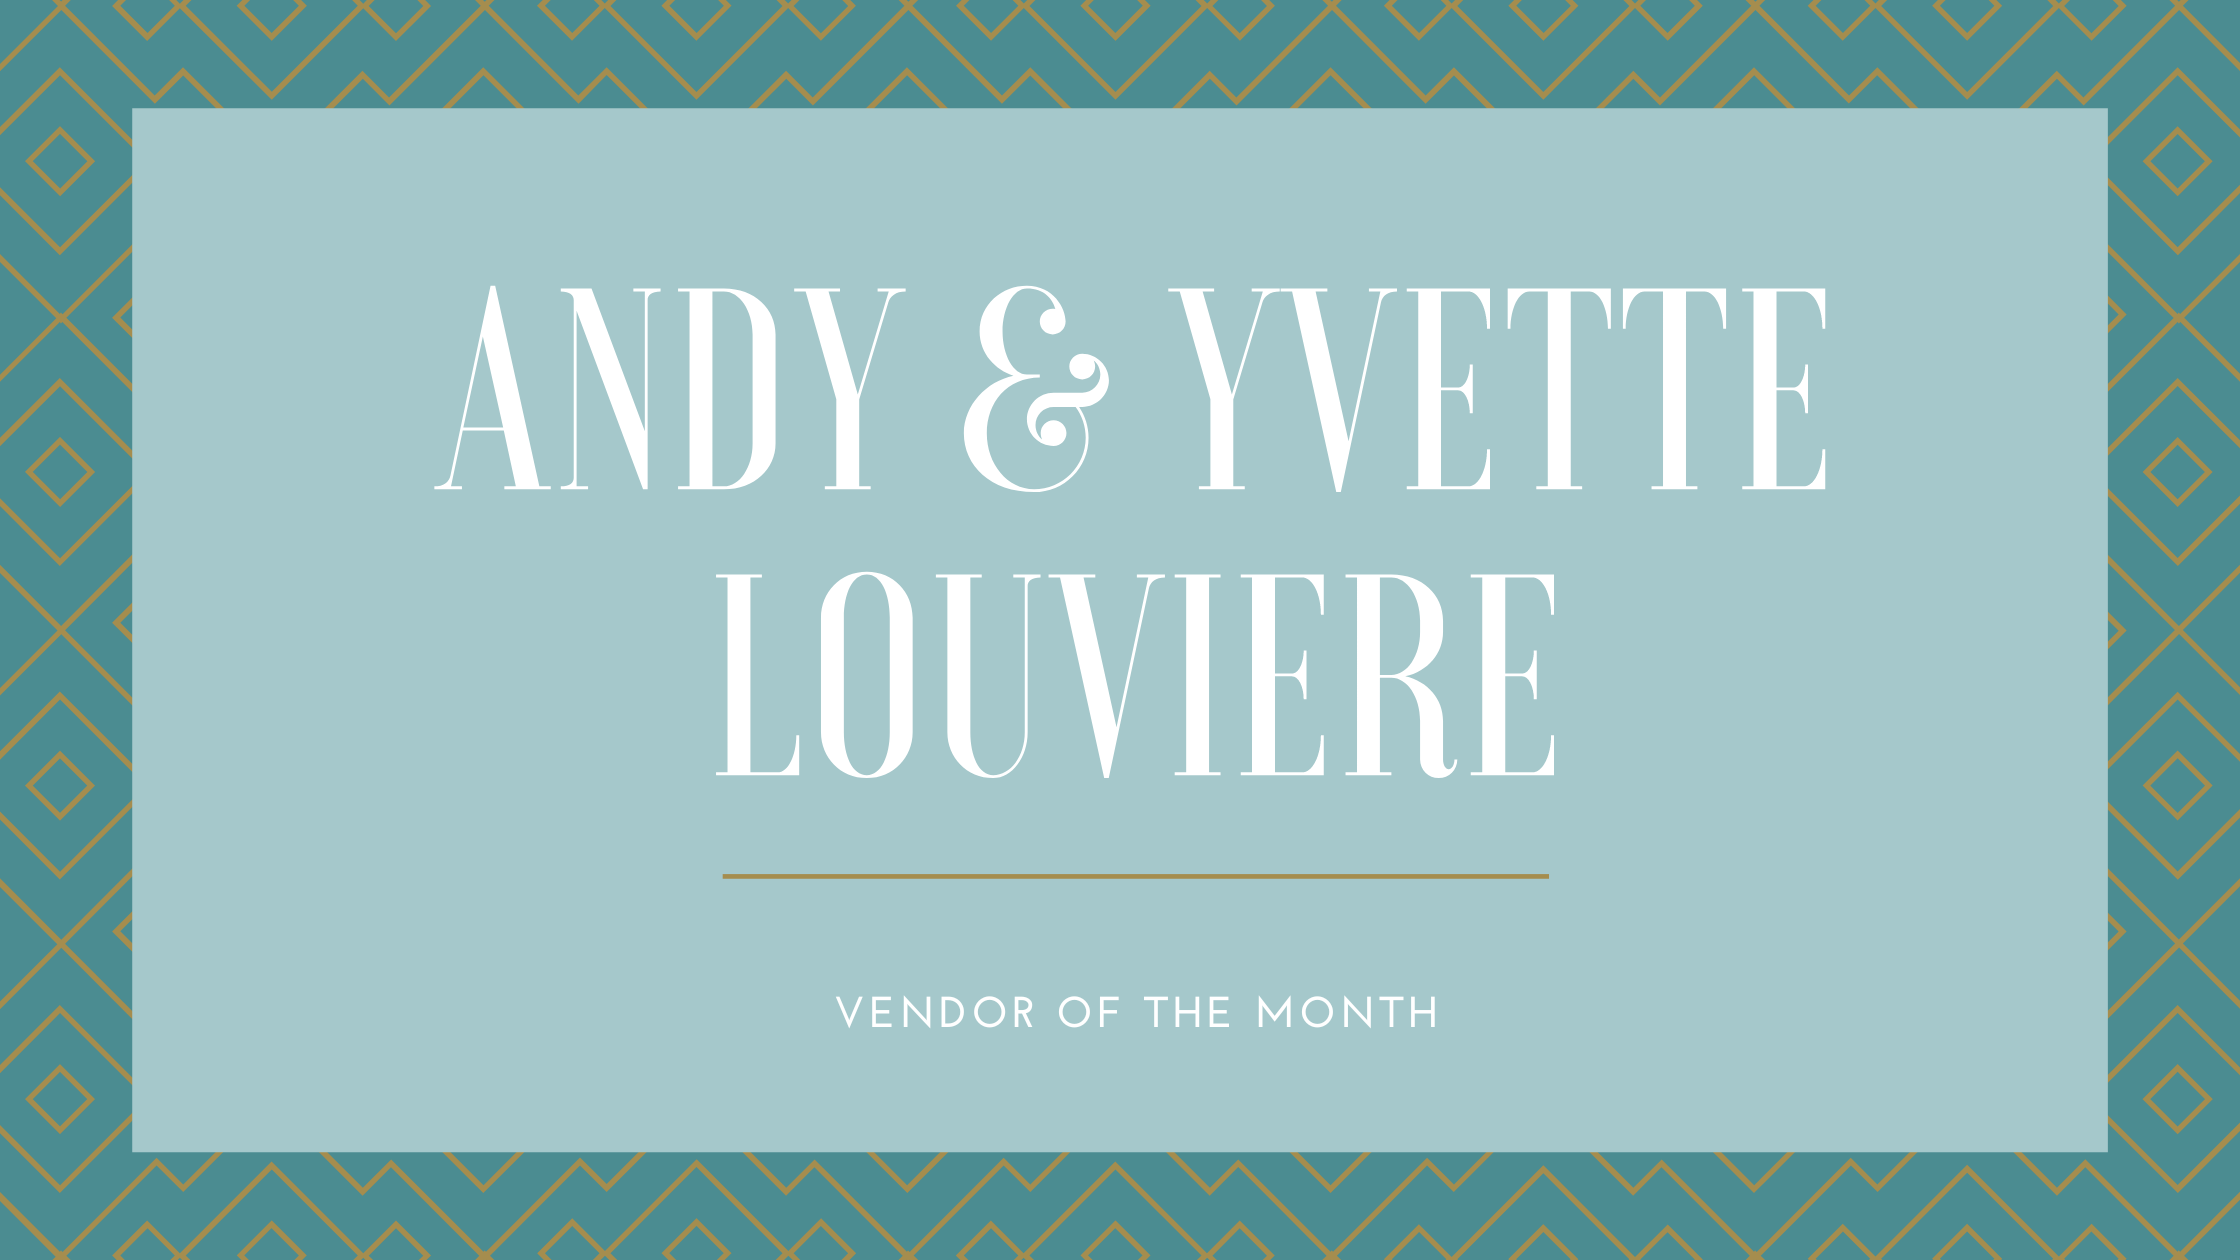 Andy and Yvette Louviere